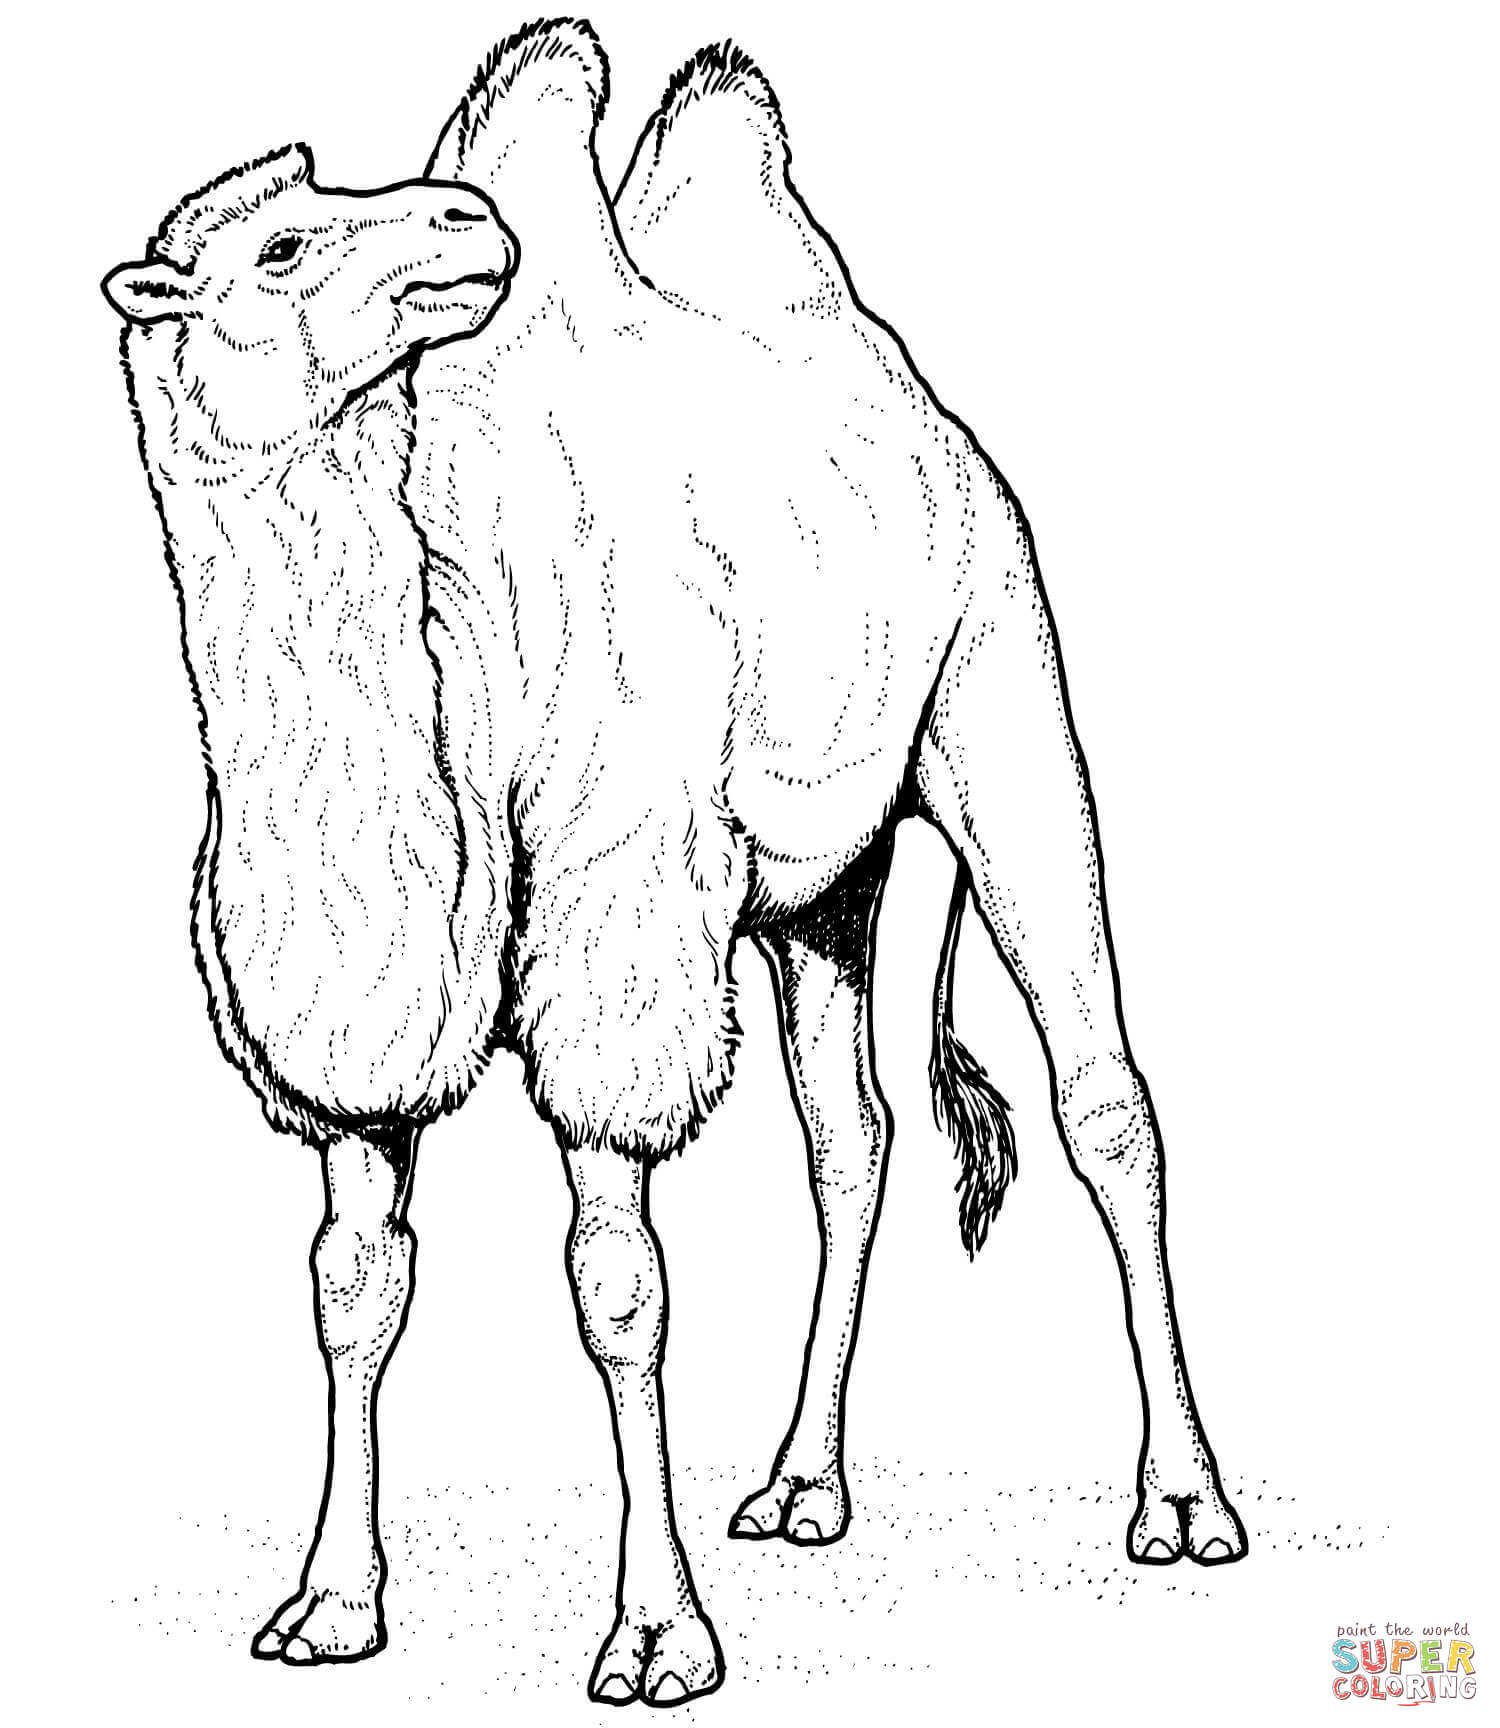 Camels coloring pages | Free Coloring Pages